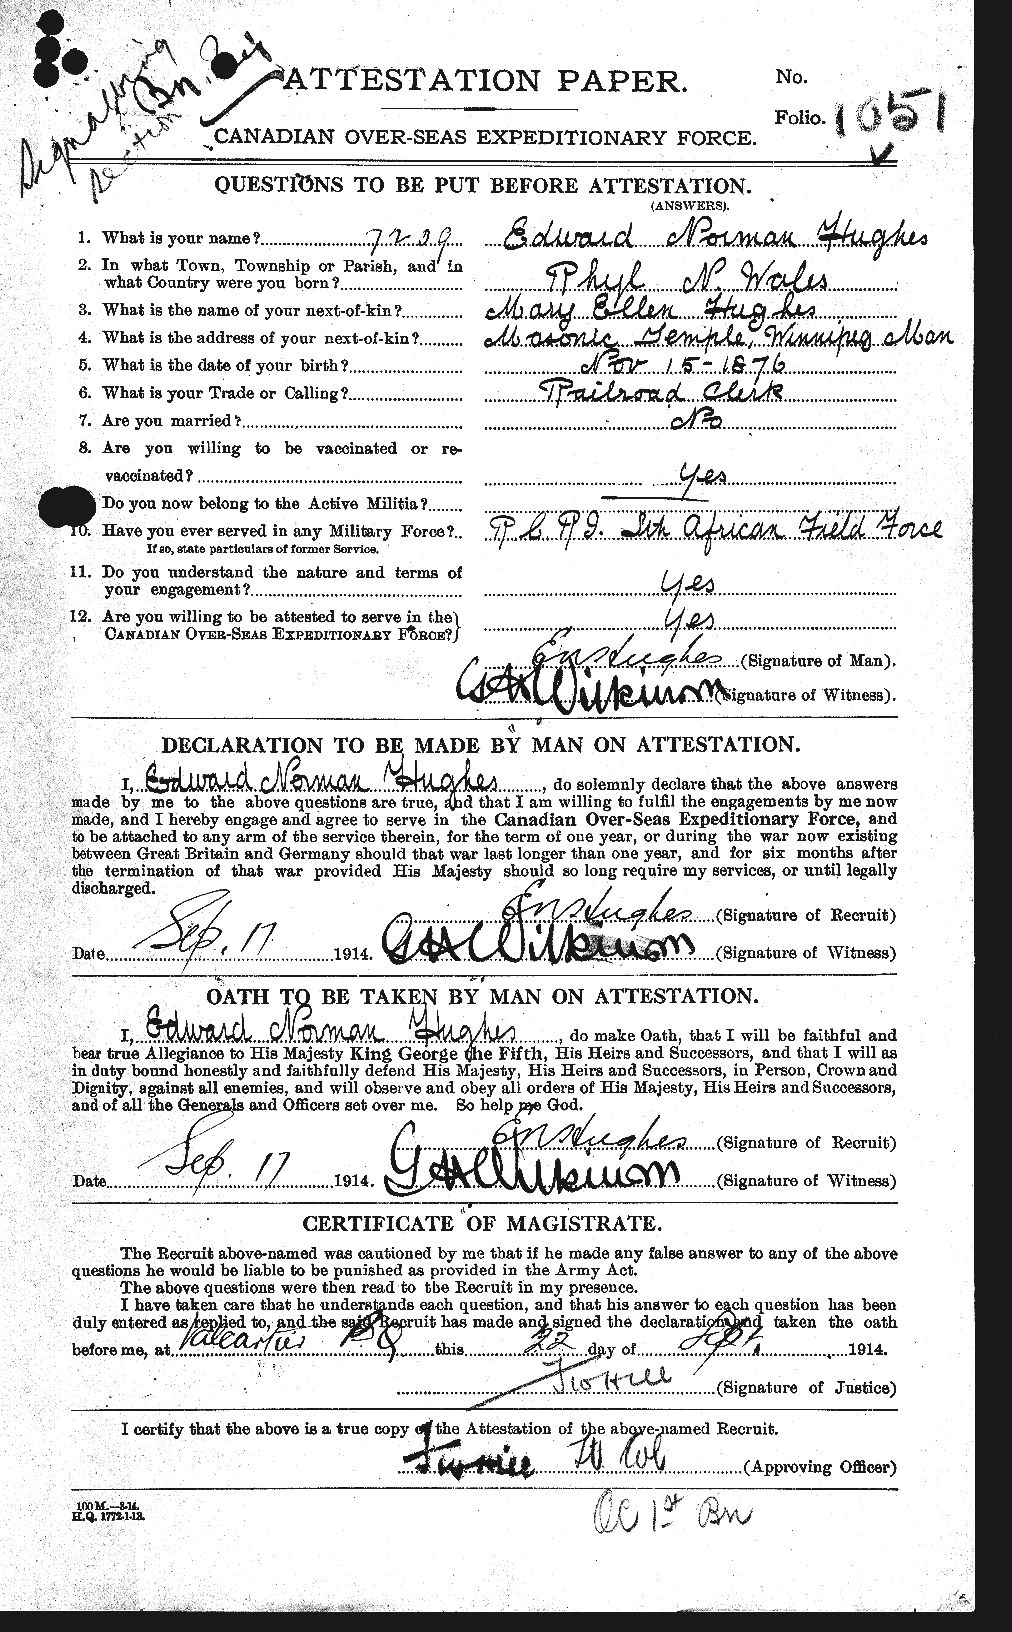 Personnel Records of the First World War - CEF 402689a